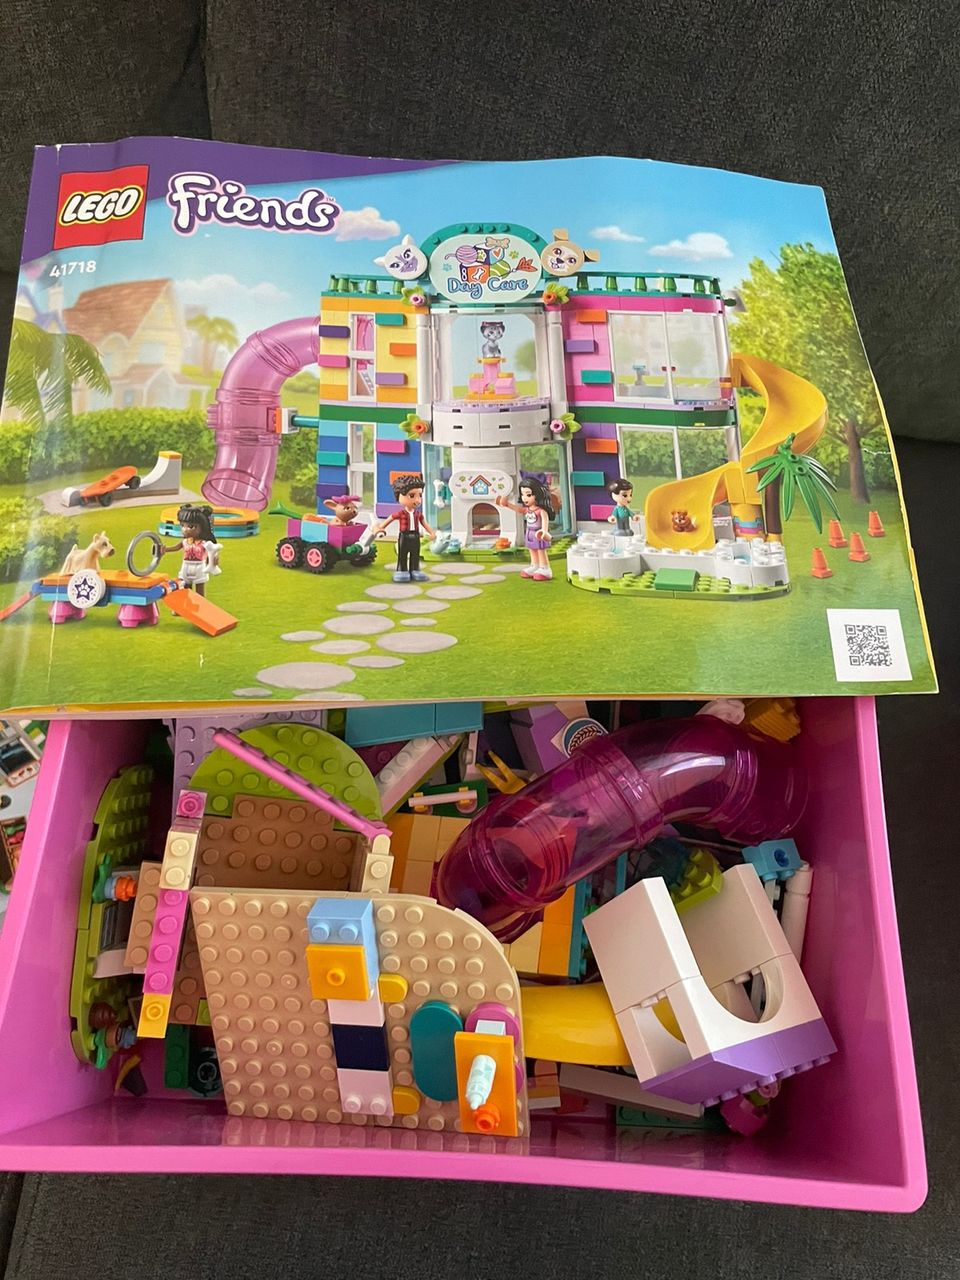 Lego friends Day care